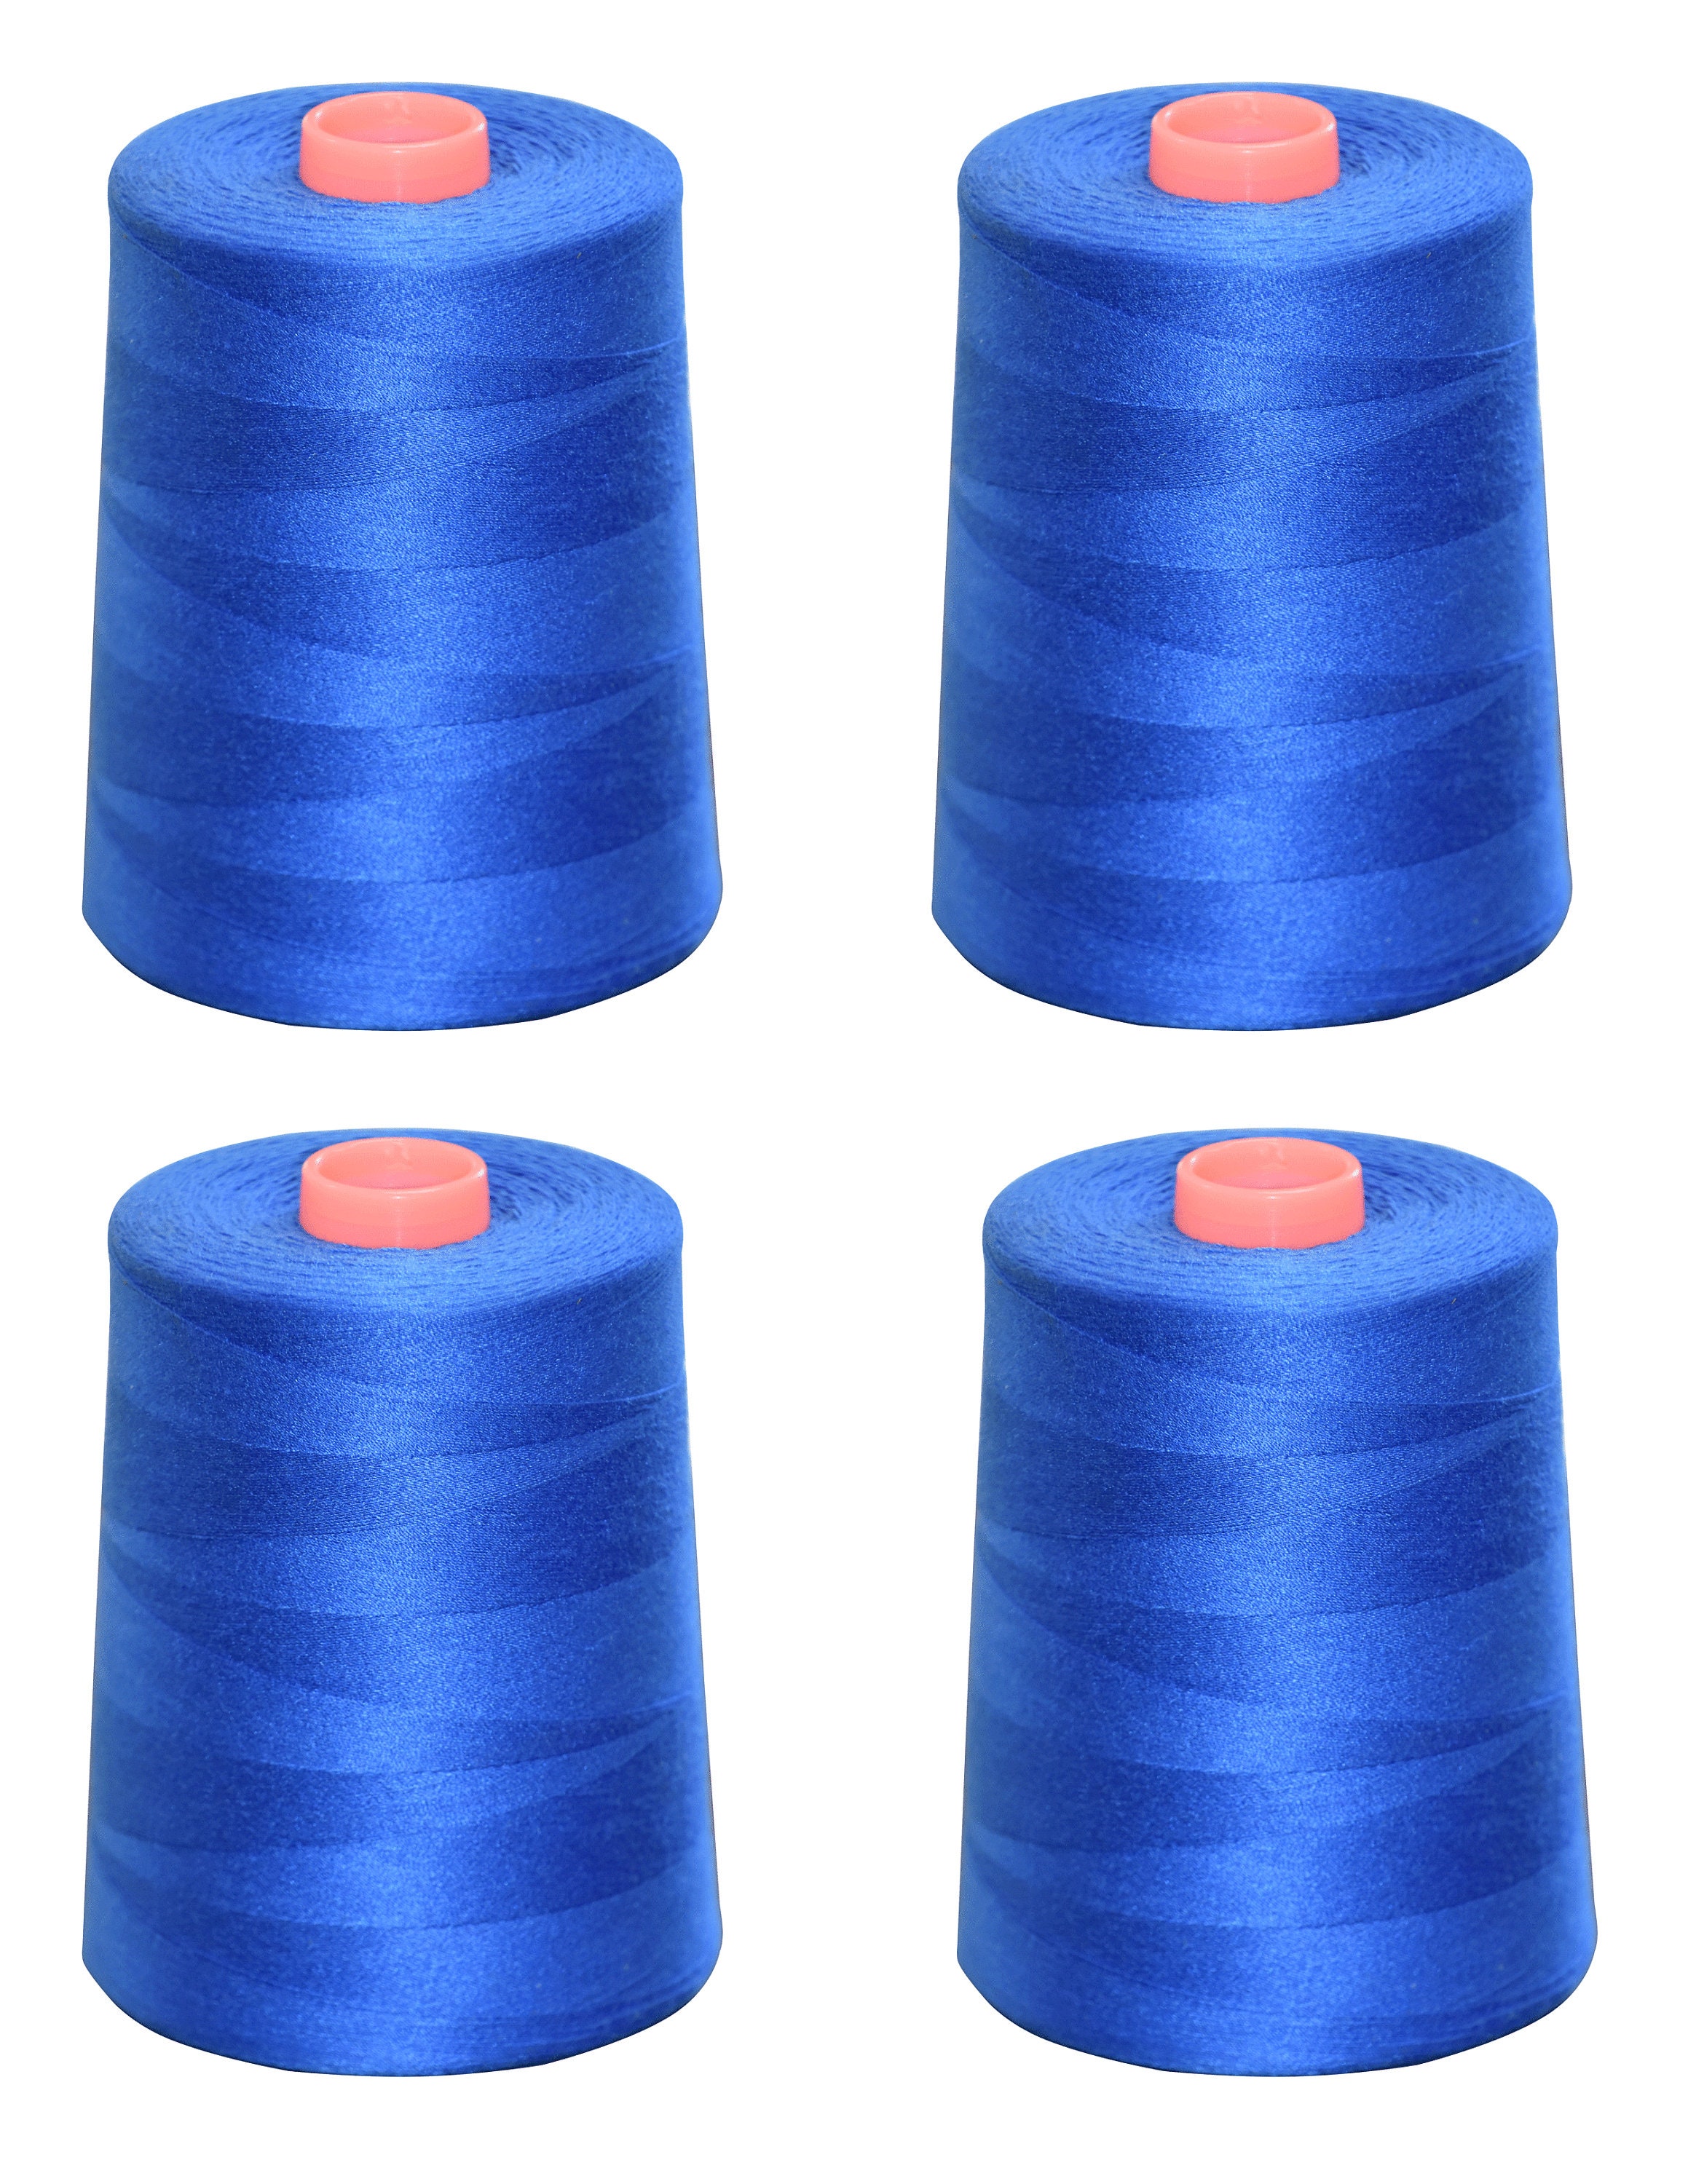 AK Trading 4-Pack Light Blue All Purpose Sewing Thread Cones (6000 Yards  Each) of High Tensile Polyester Thread Spools for Sewing, Quilting, Serger  Machines, Overlock, Merrow & Hand Embroidery 